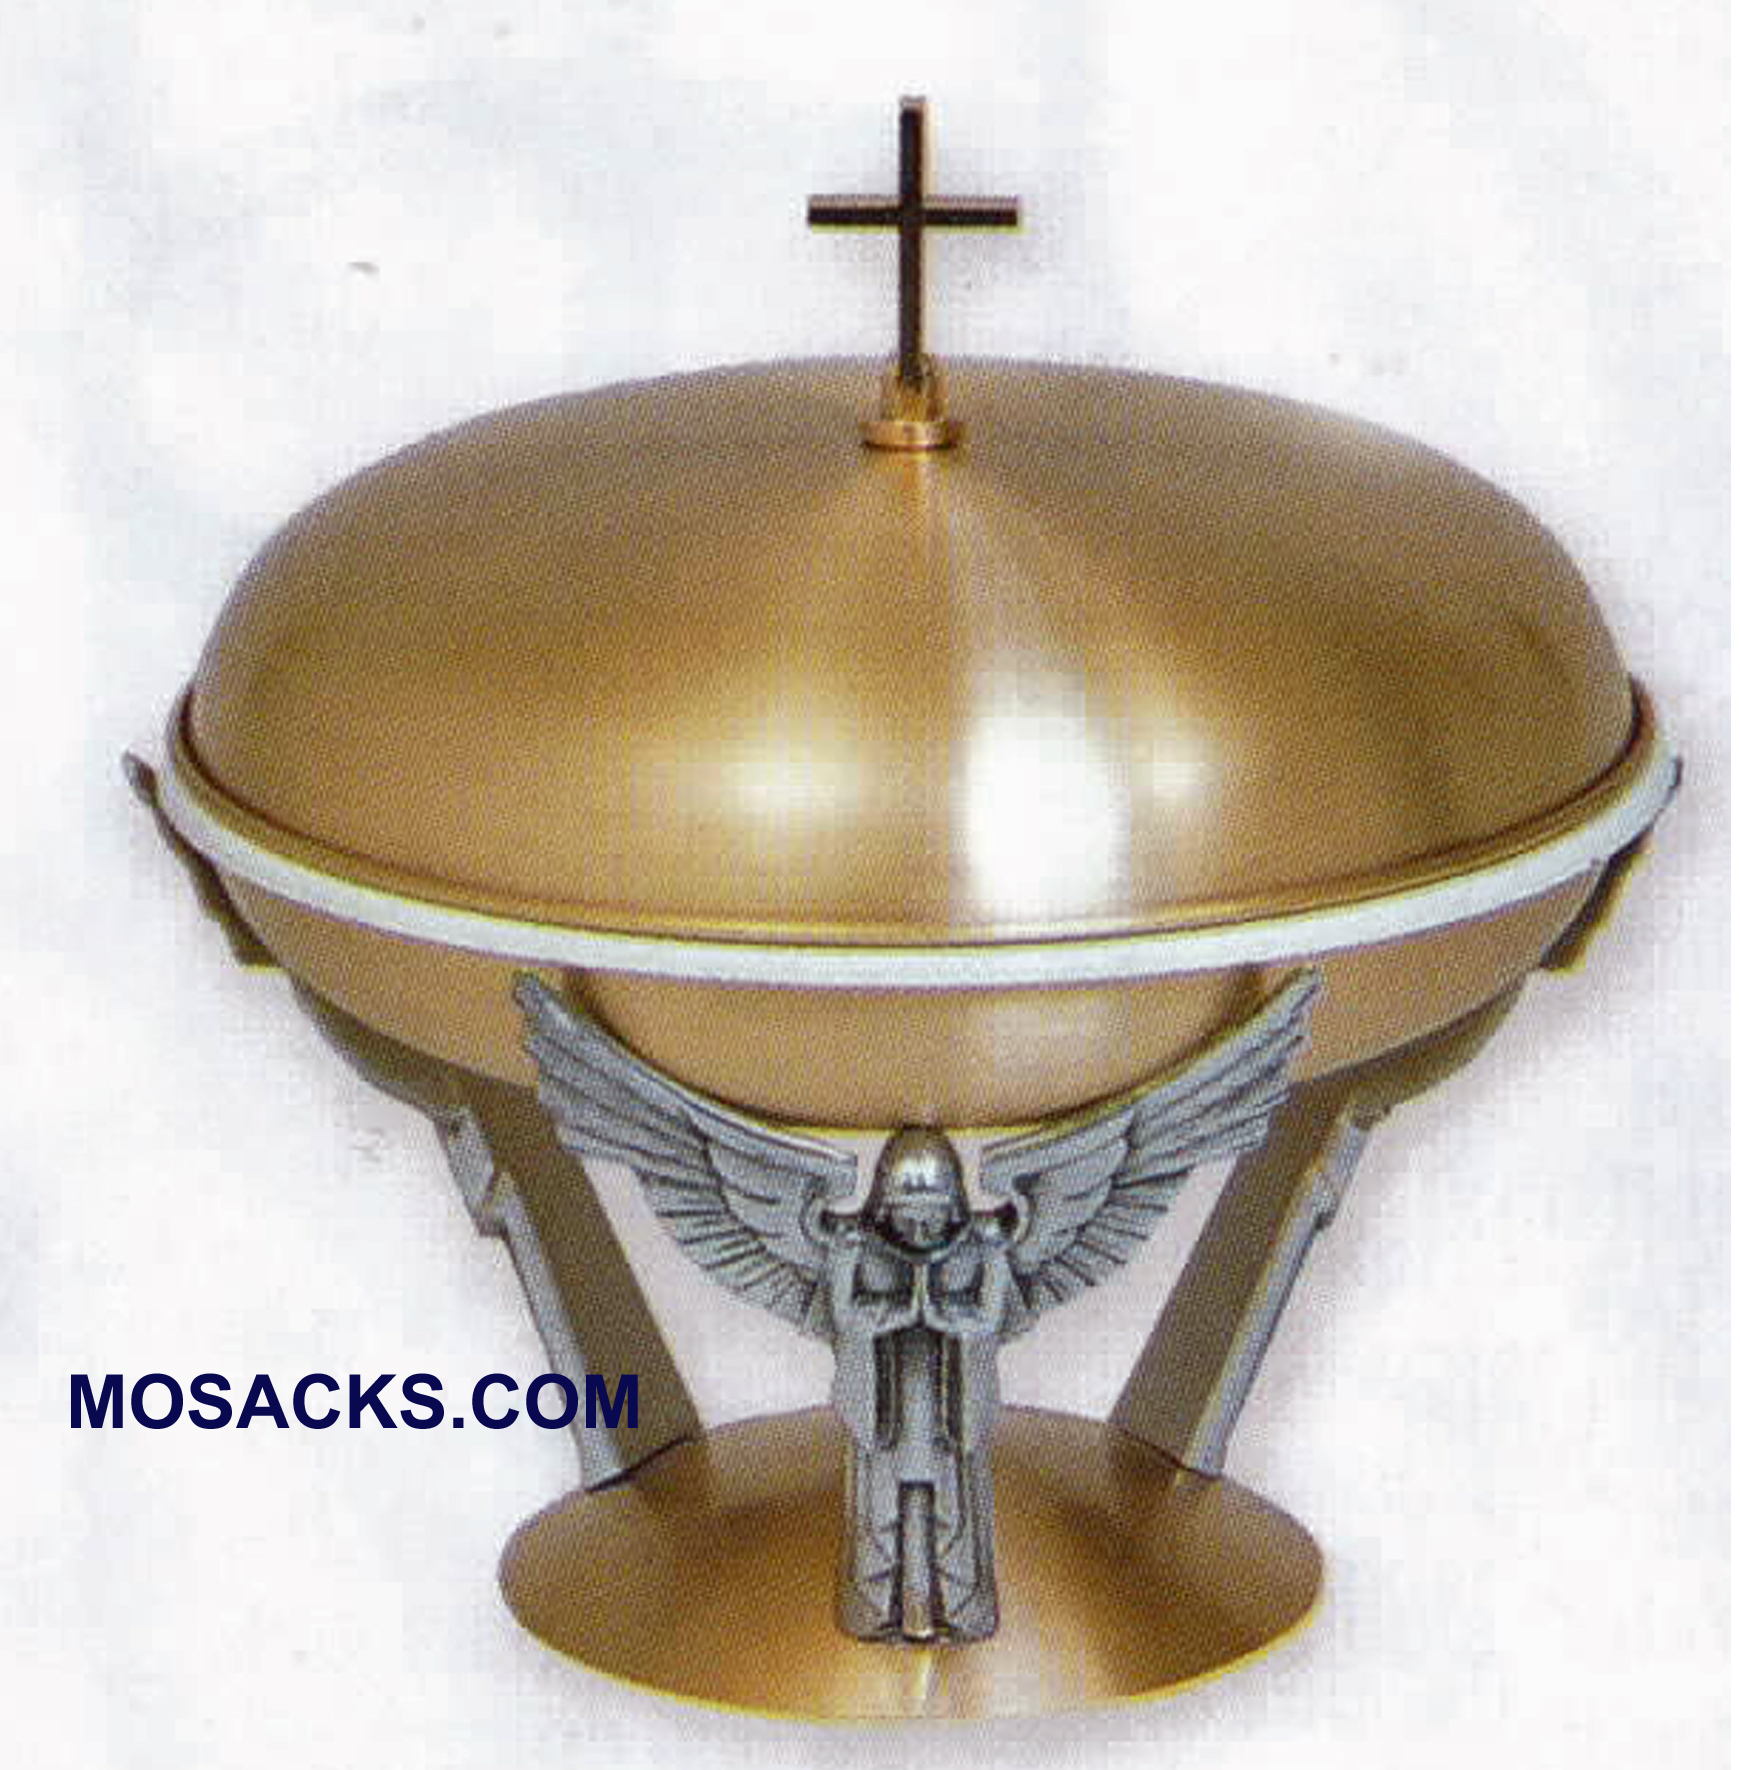 Beautiful Bronze Baptismal Bowl in Satin Finish with Plastic Liner.  Three Angels in Oxidized Silver support the Baptismal Bowl.  K341 Baptismal Bowl measures 14-1/5" Diamer with an 8" Base.